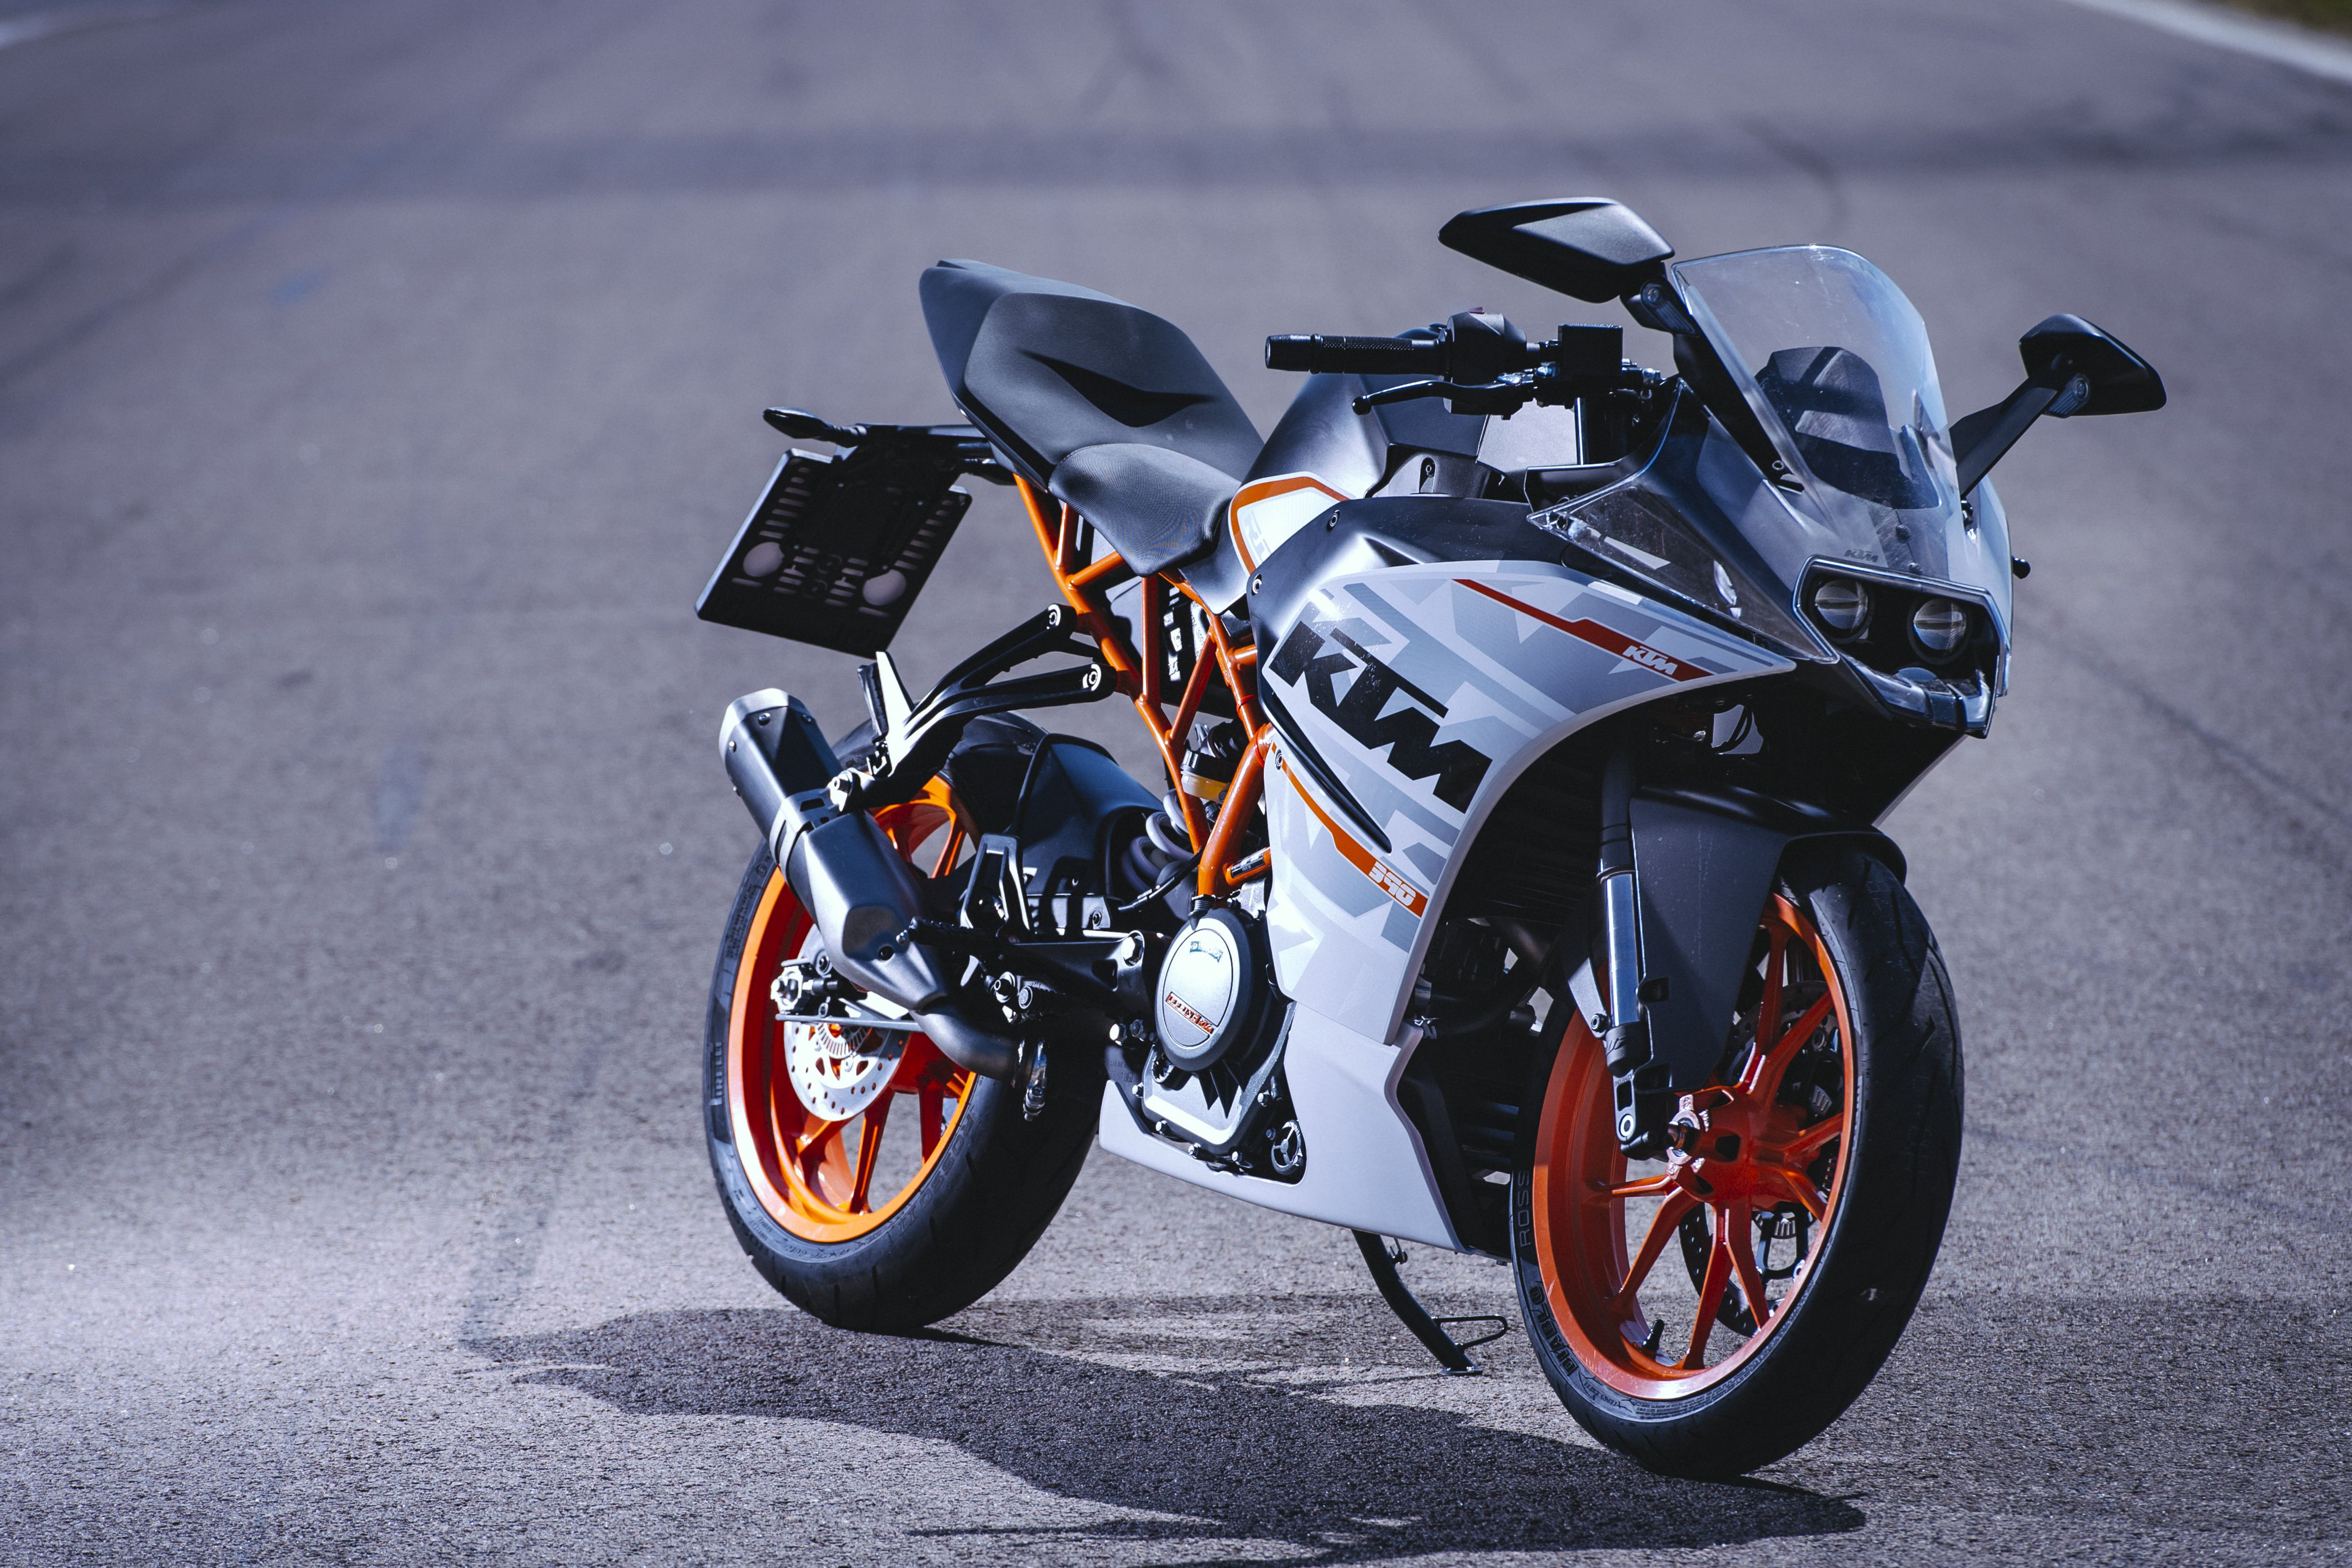 KTM updates the RC390 for 2016